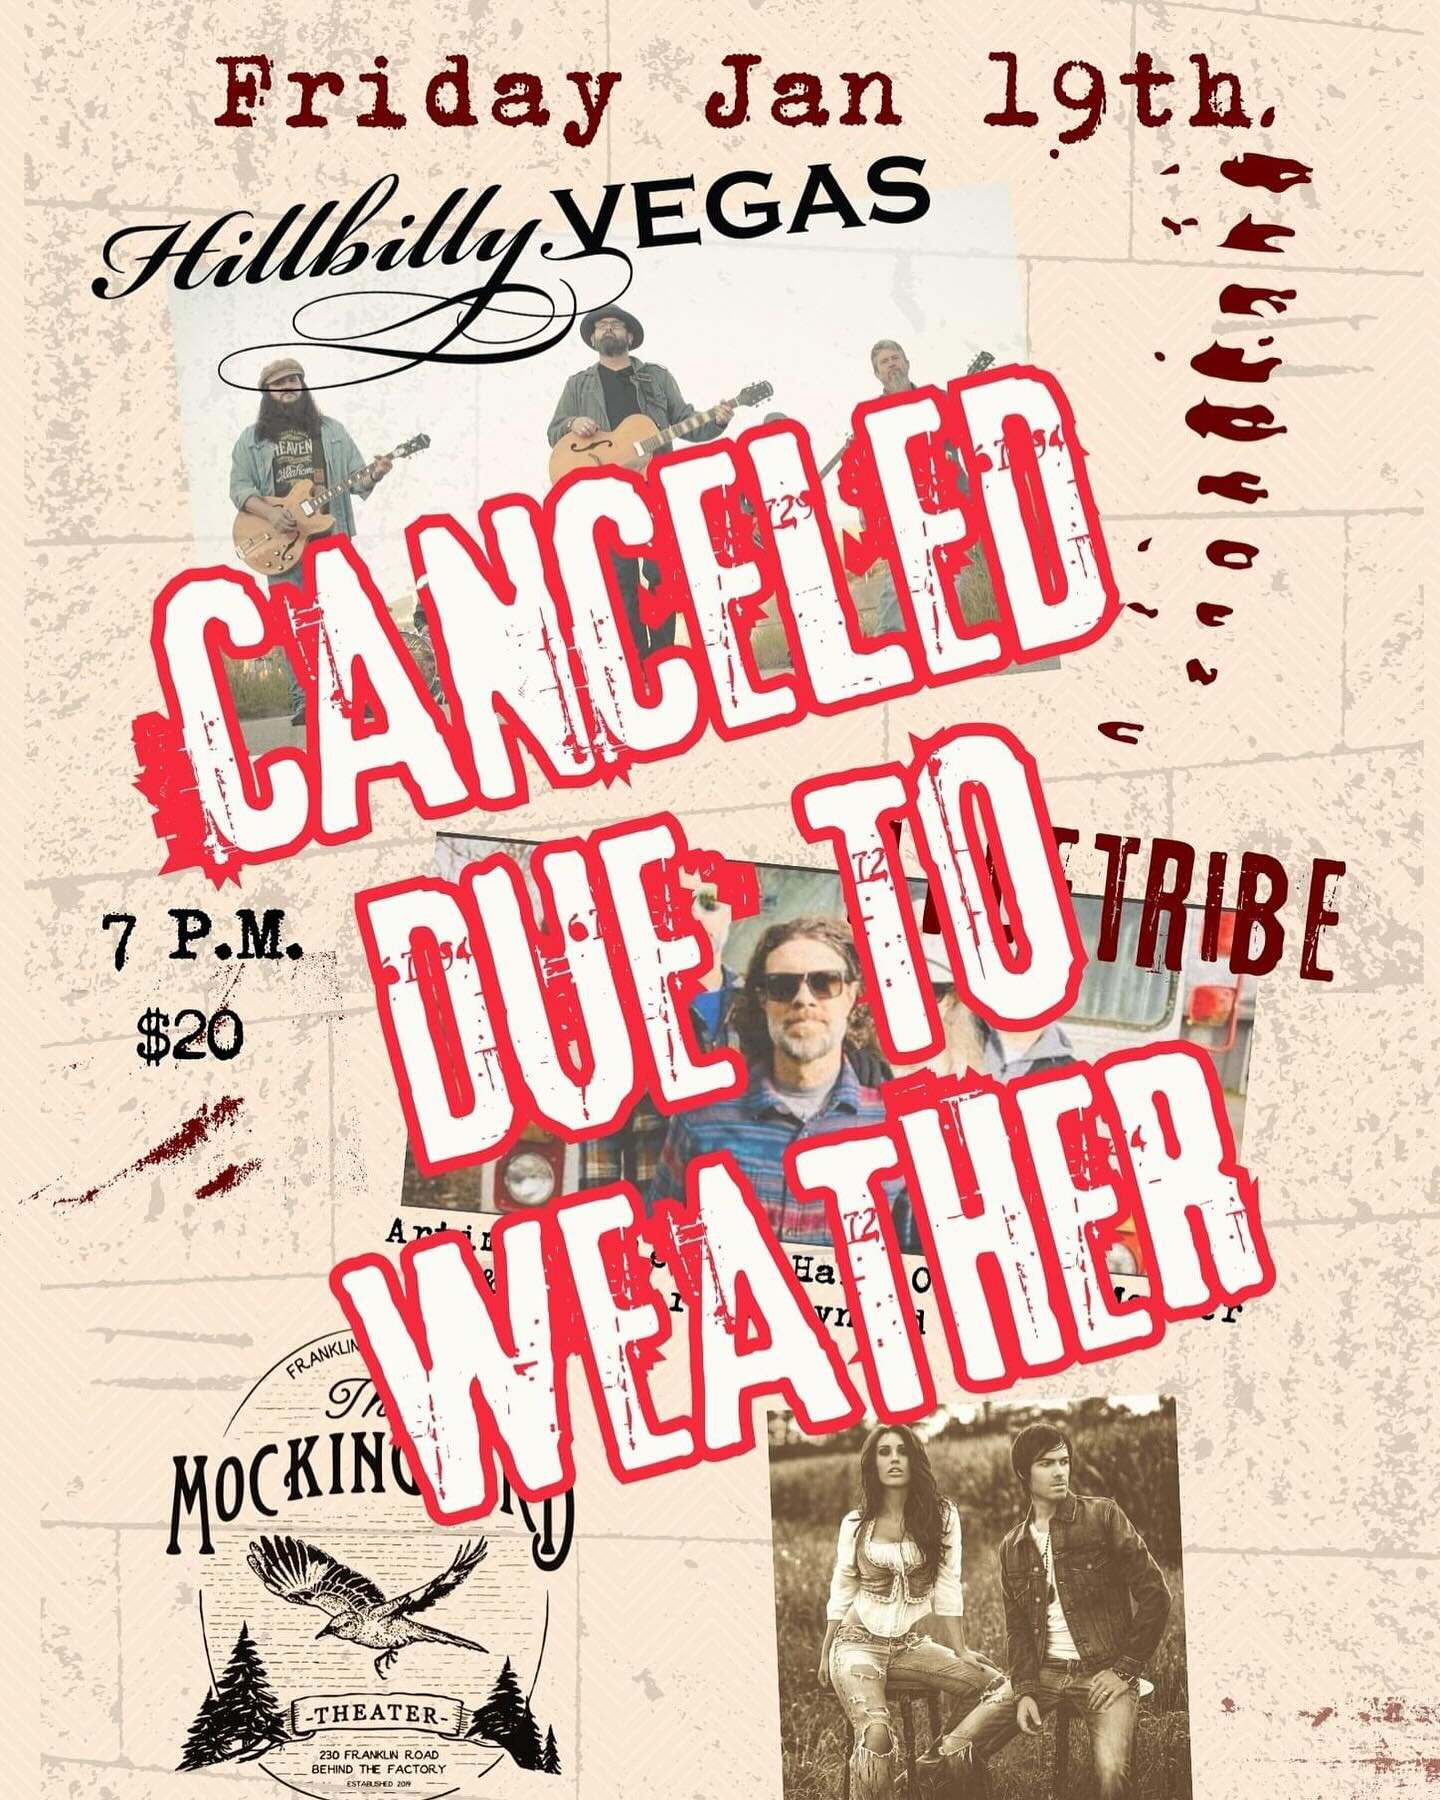 Hey y&rsquo;all, we have some very unfortunate news as we have to reschedule the Hillbilly Vegas, Pyletribe, &amp; Lovella show ONCE AGAIN. Unfortunately the weather has made travel very hard for the artists, and it is simply something not worth risk